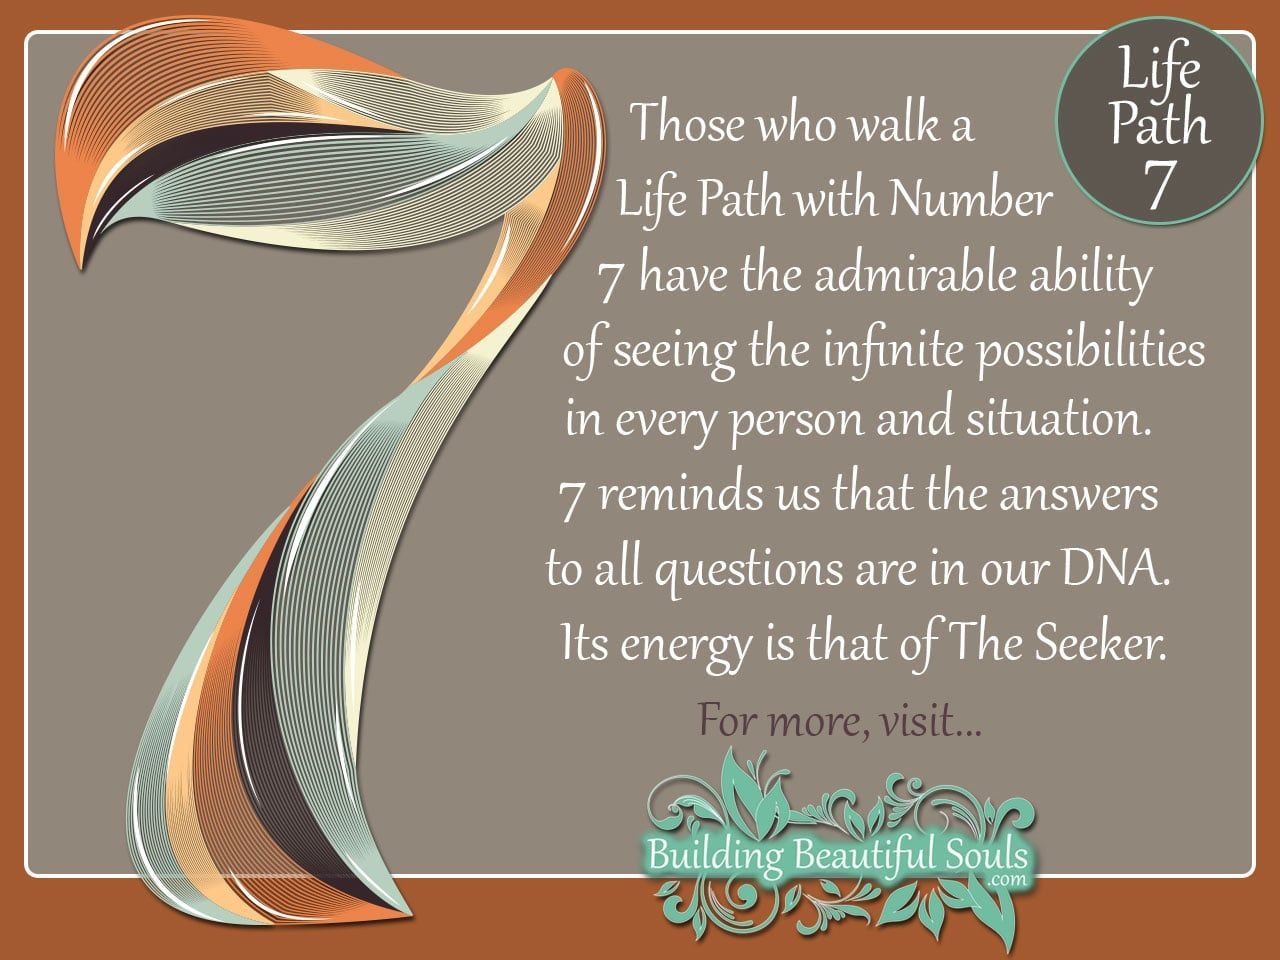 What number 7 means spiritually?